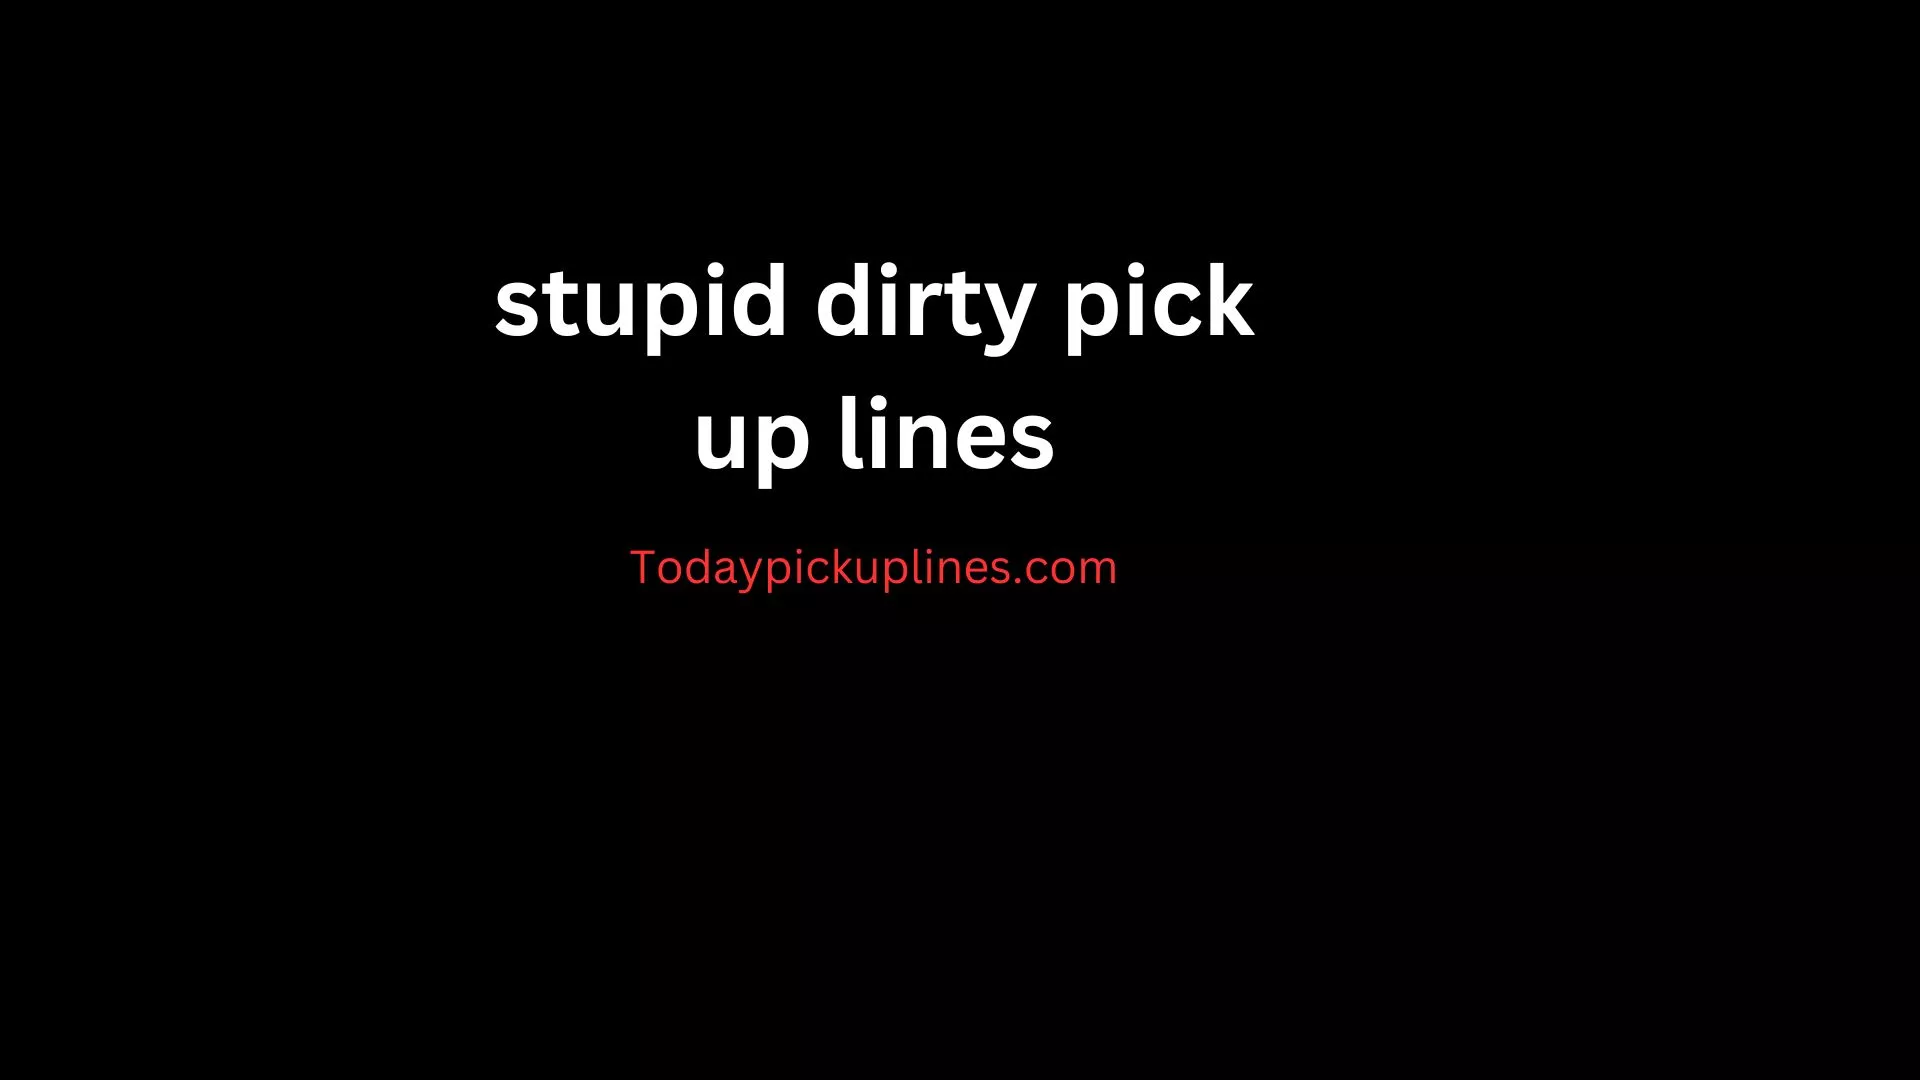 Stupid Dirty Pick Up Lines.webp